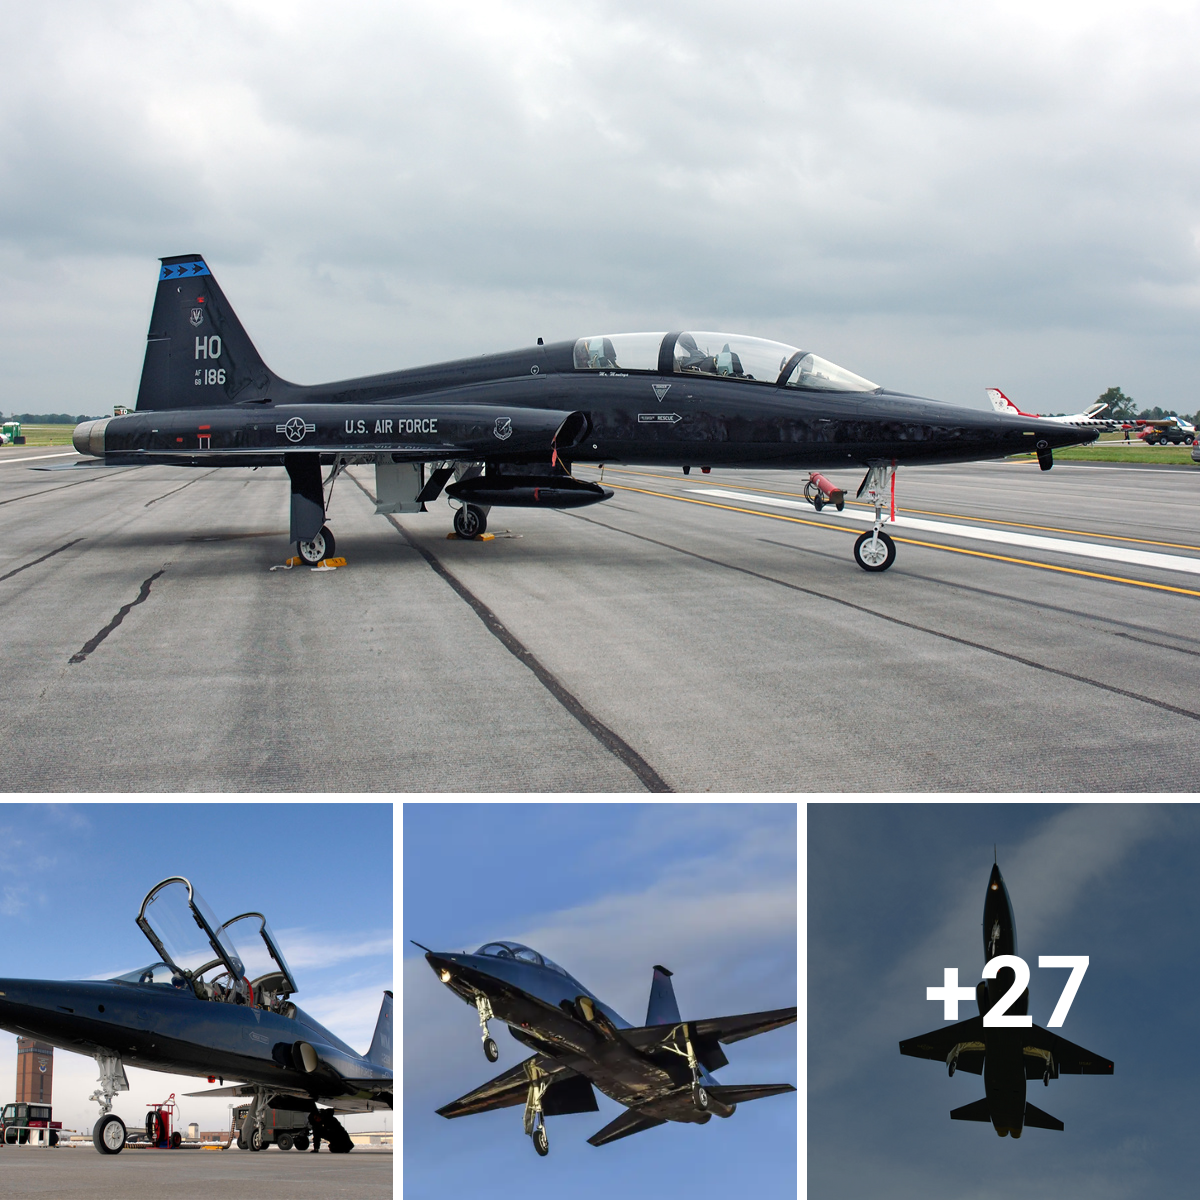 T-38 Talon jets, supersonic trainer aircraft, take off